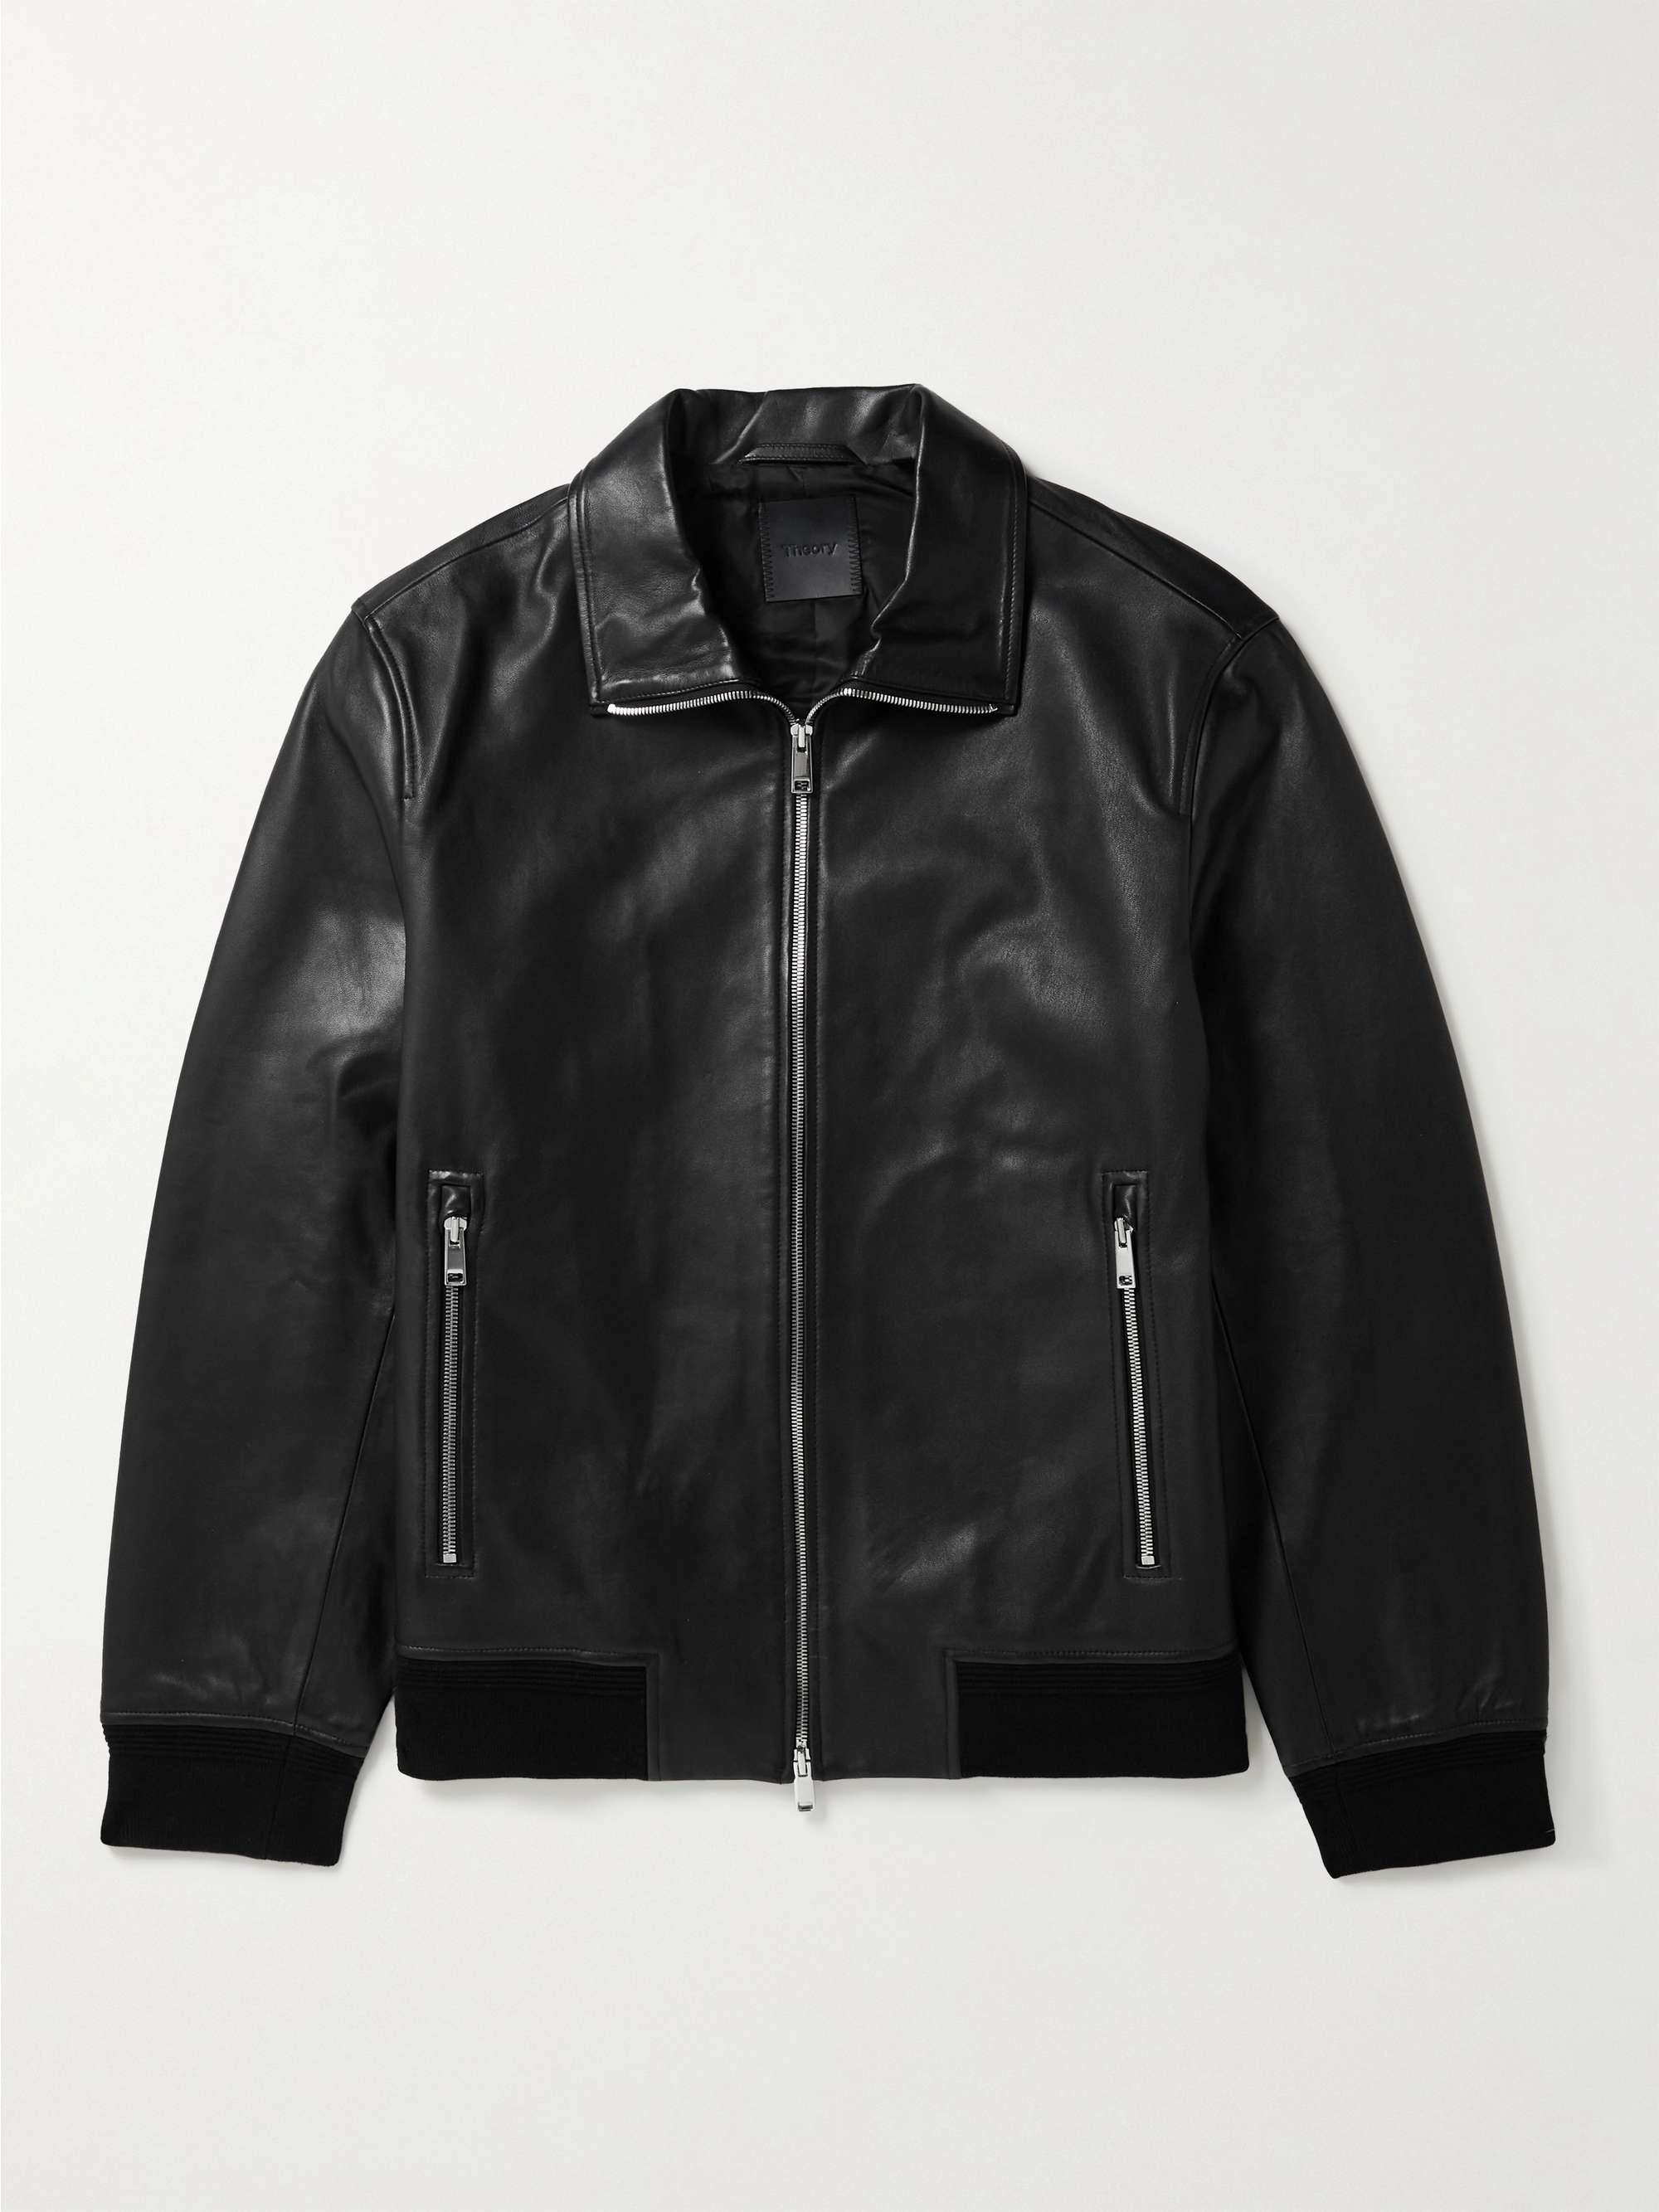 THEORY Marco Leather Jacket for Men | MR PORTER